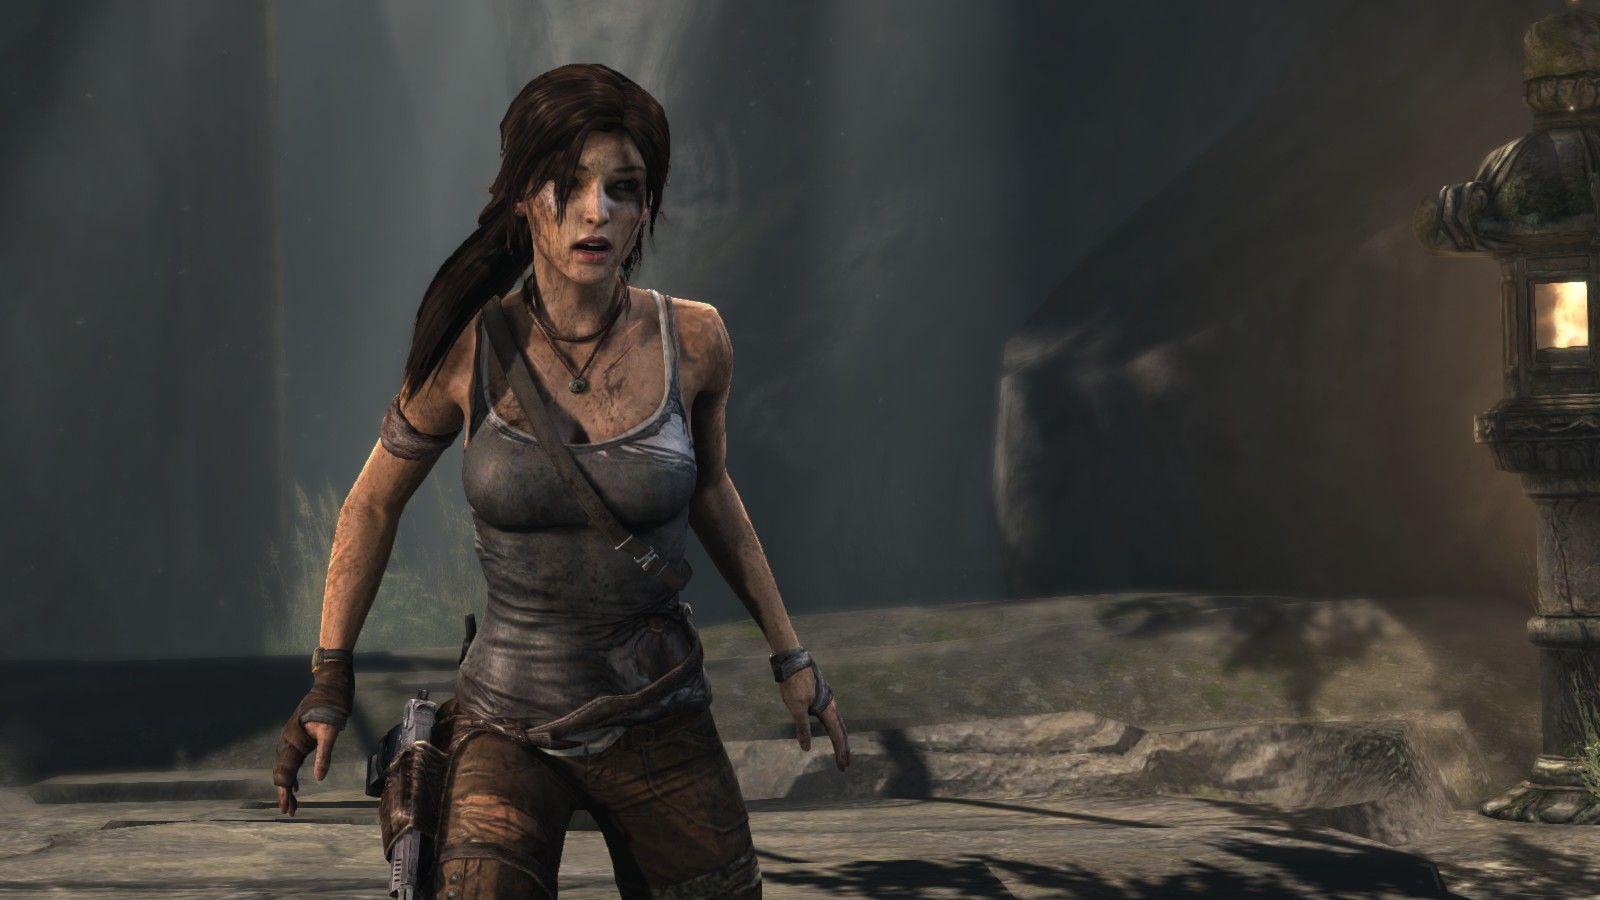 Square Enix CEO confirms Tomb Raider sequel in the works